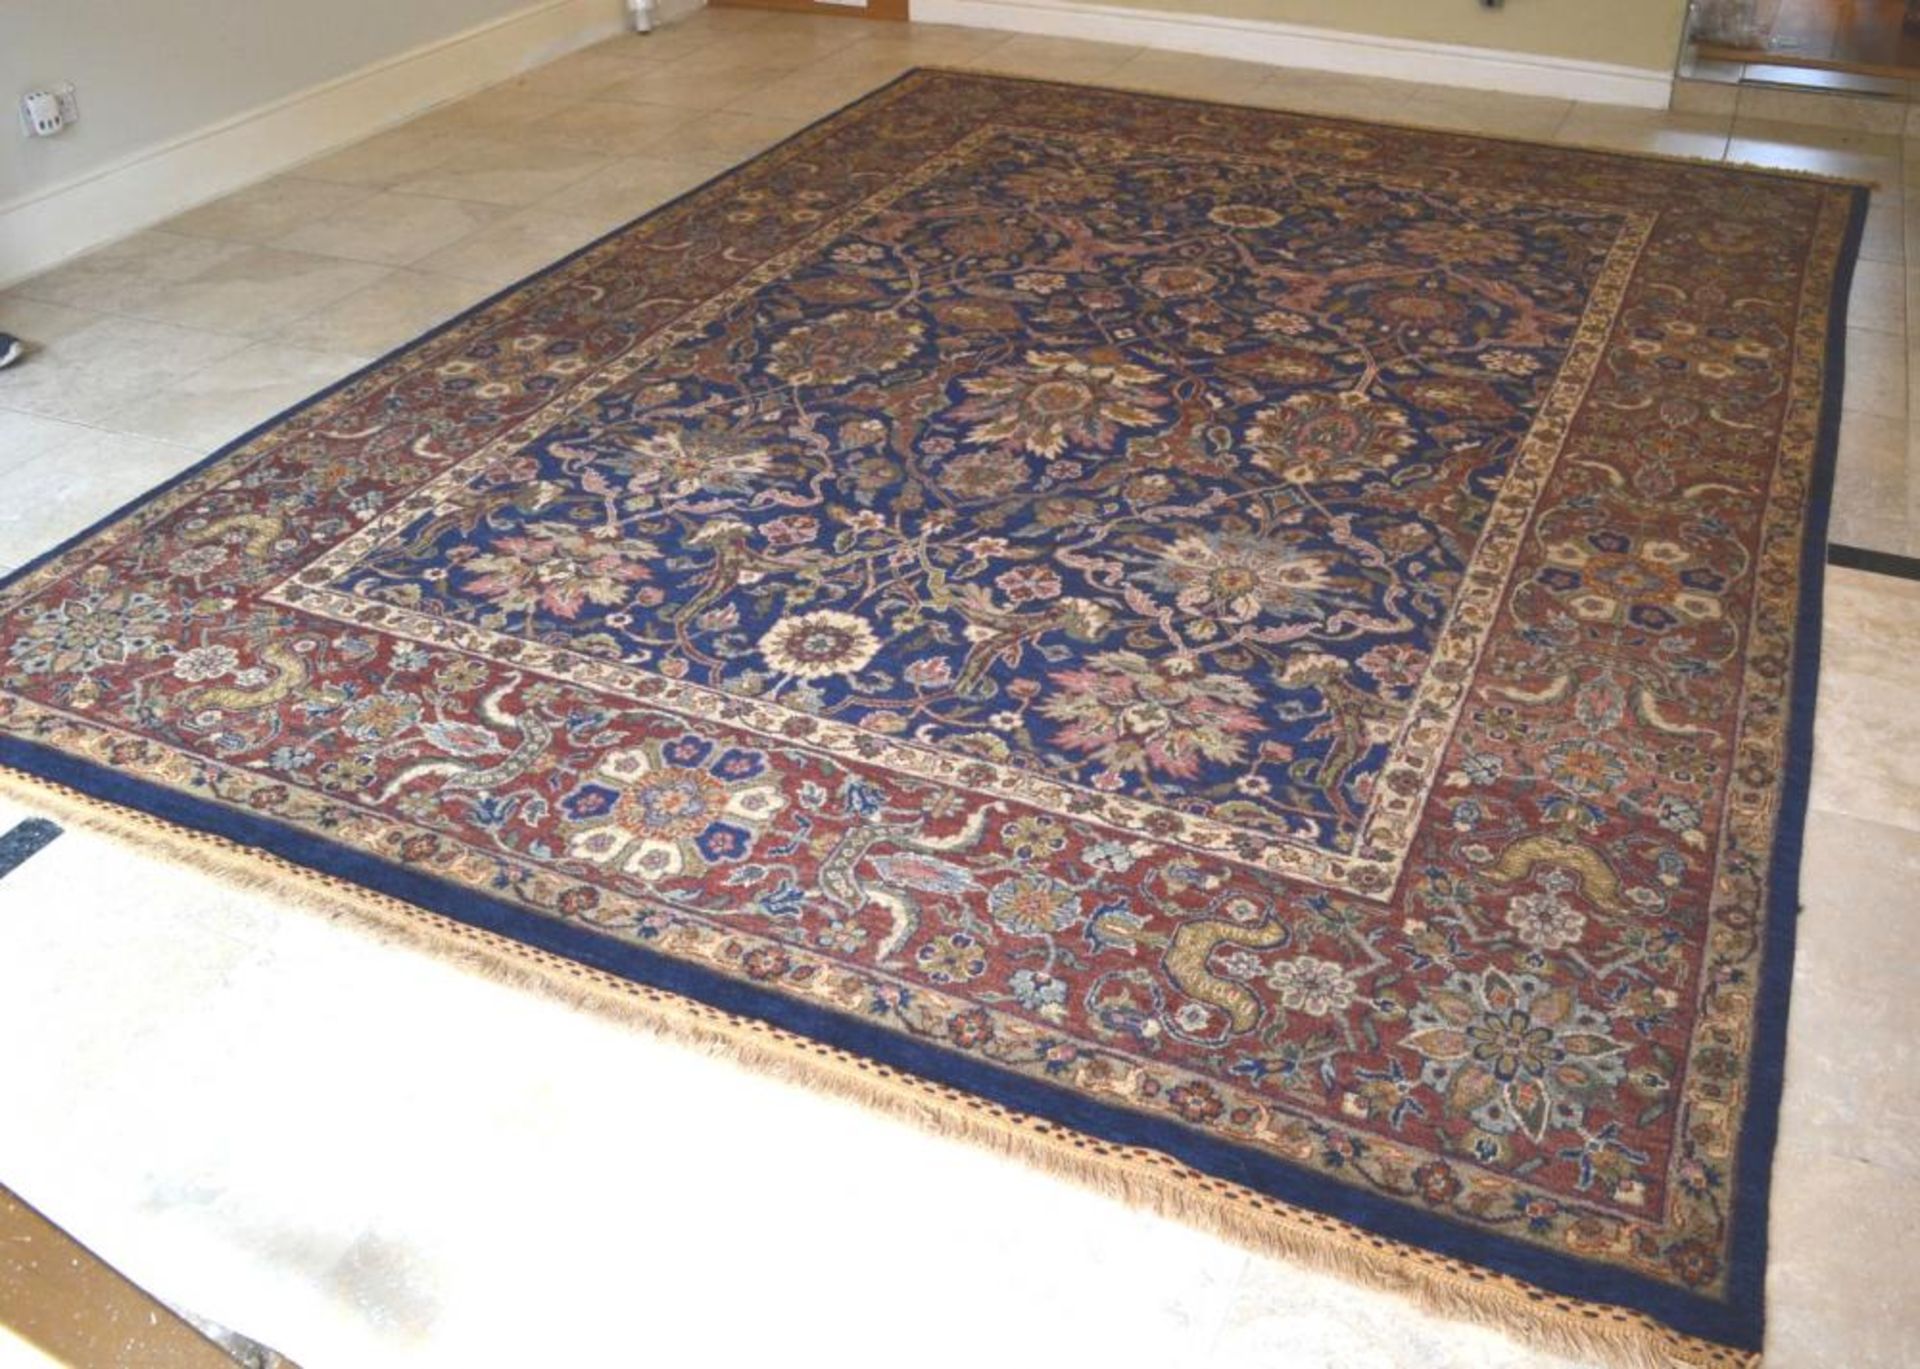 1 x Fine Indian Vegetable Dyed Handmade Carpet in Navy and Rust - All Wool With Cotton Foundation - - Image 11 of 22